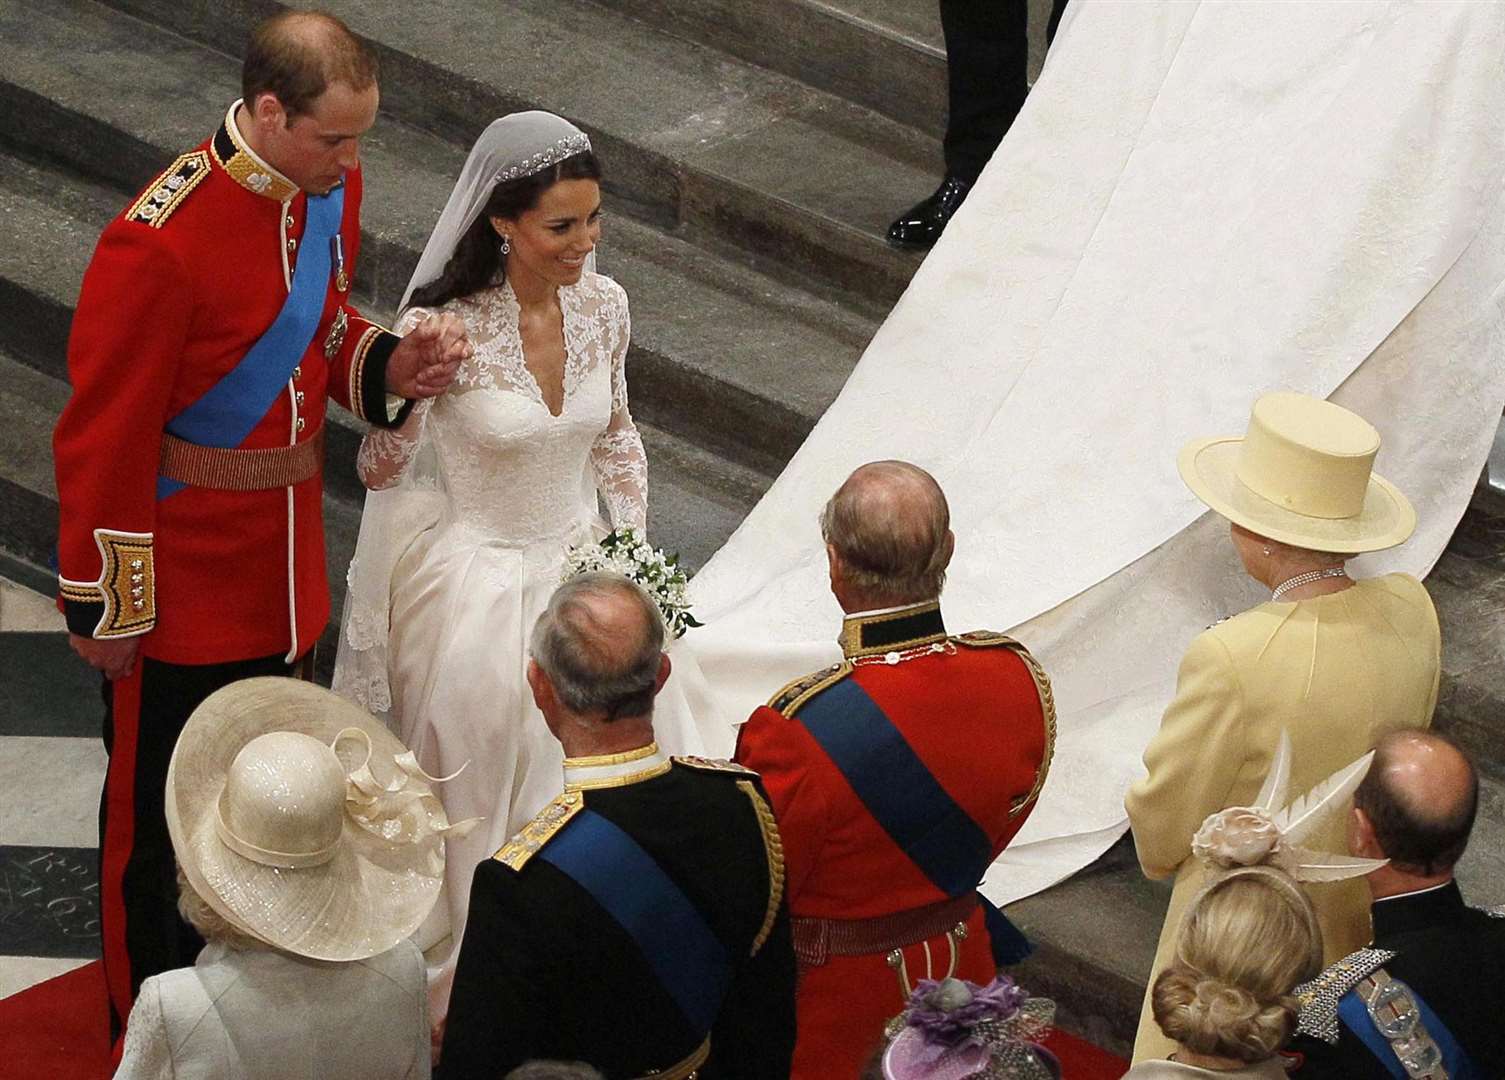 William, in his red tunic, and his new bride Catherine in front of the Queen on his wedding day (Kirsty Wigglesworth/PA)